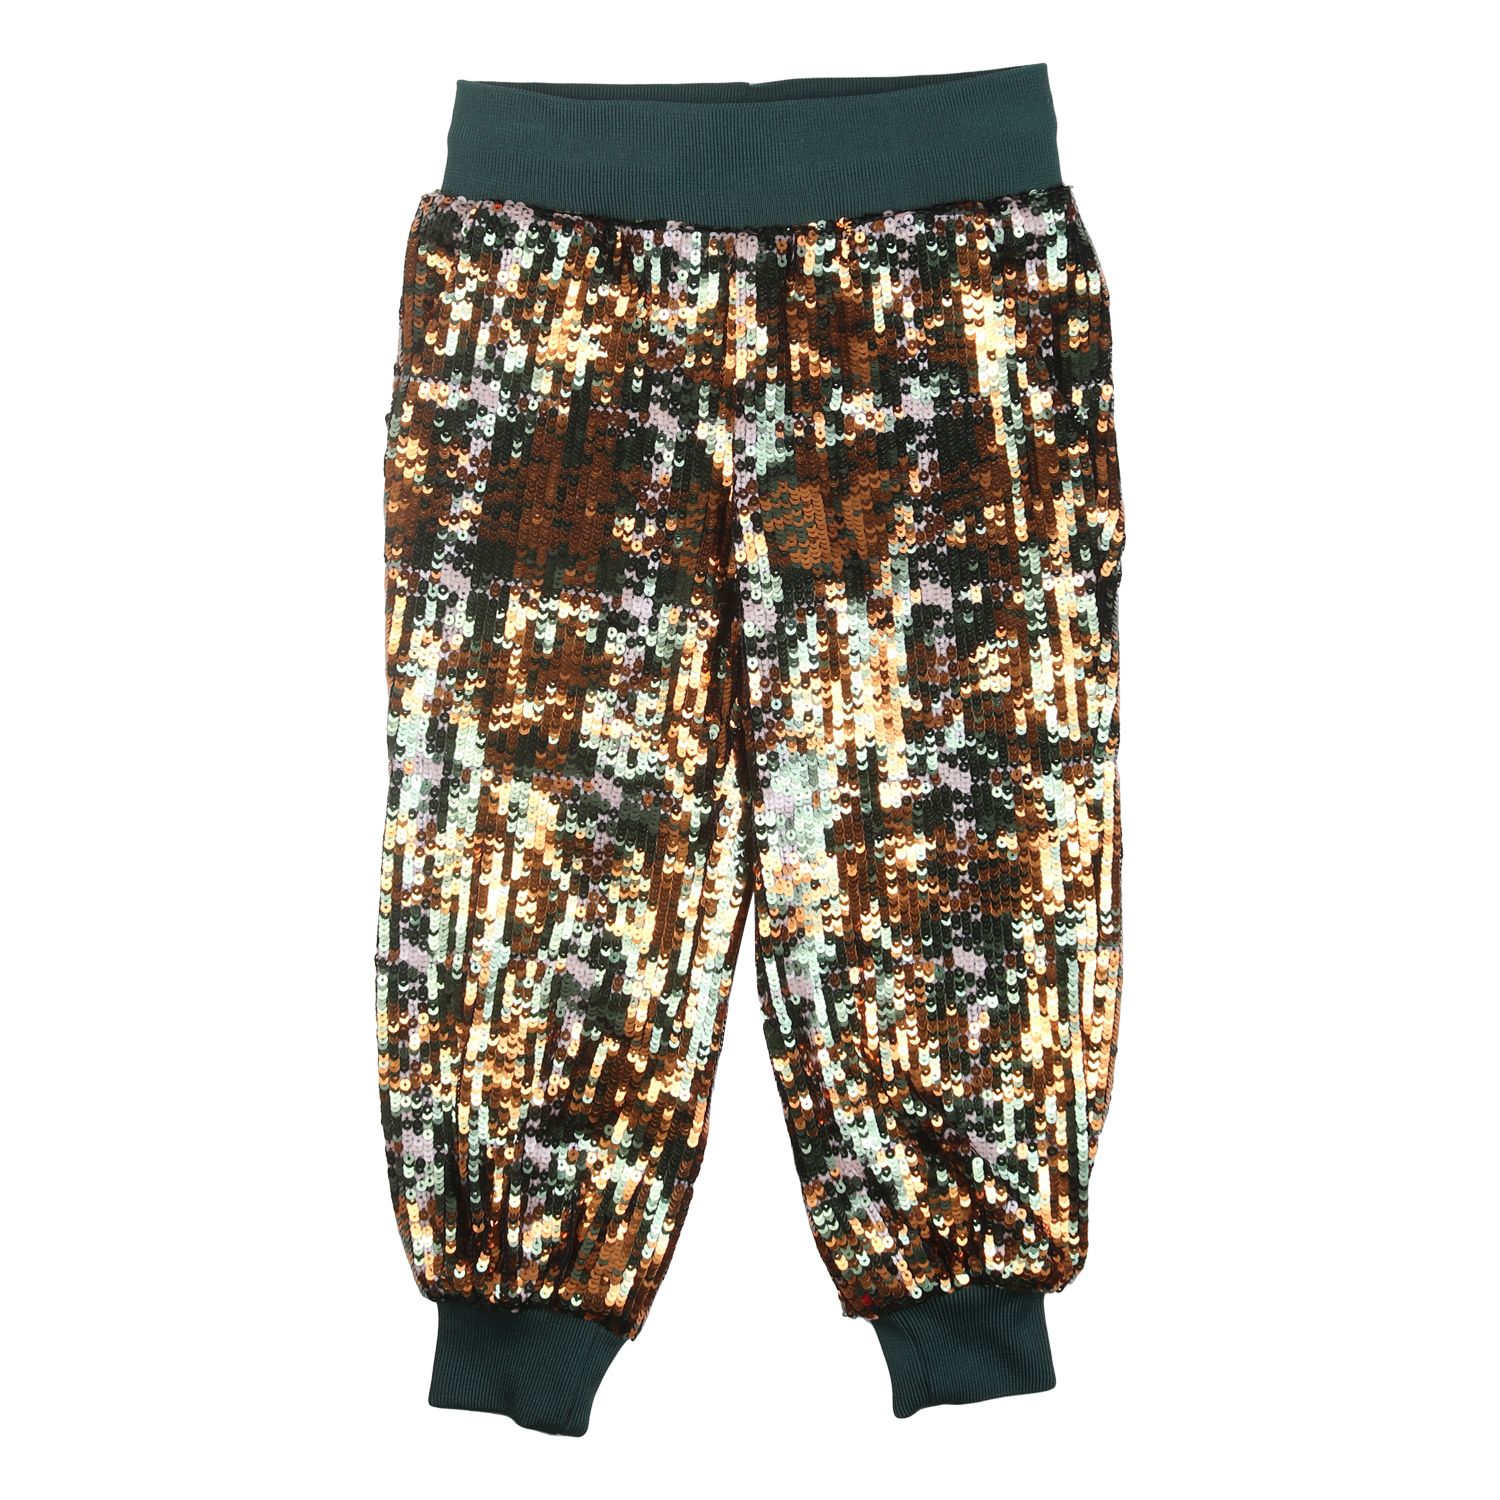 Alberta Ferretti forest green trousers -Details trousers with elastic waistband, completely in sequins, contrasting colors, elastic at the ankles -Hand wash